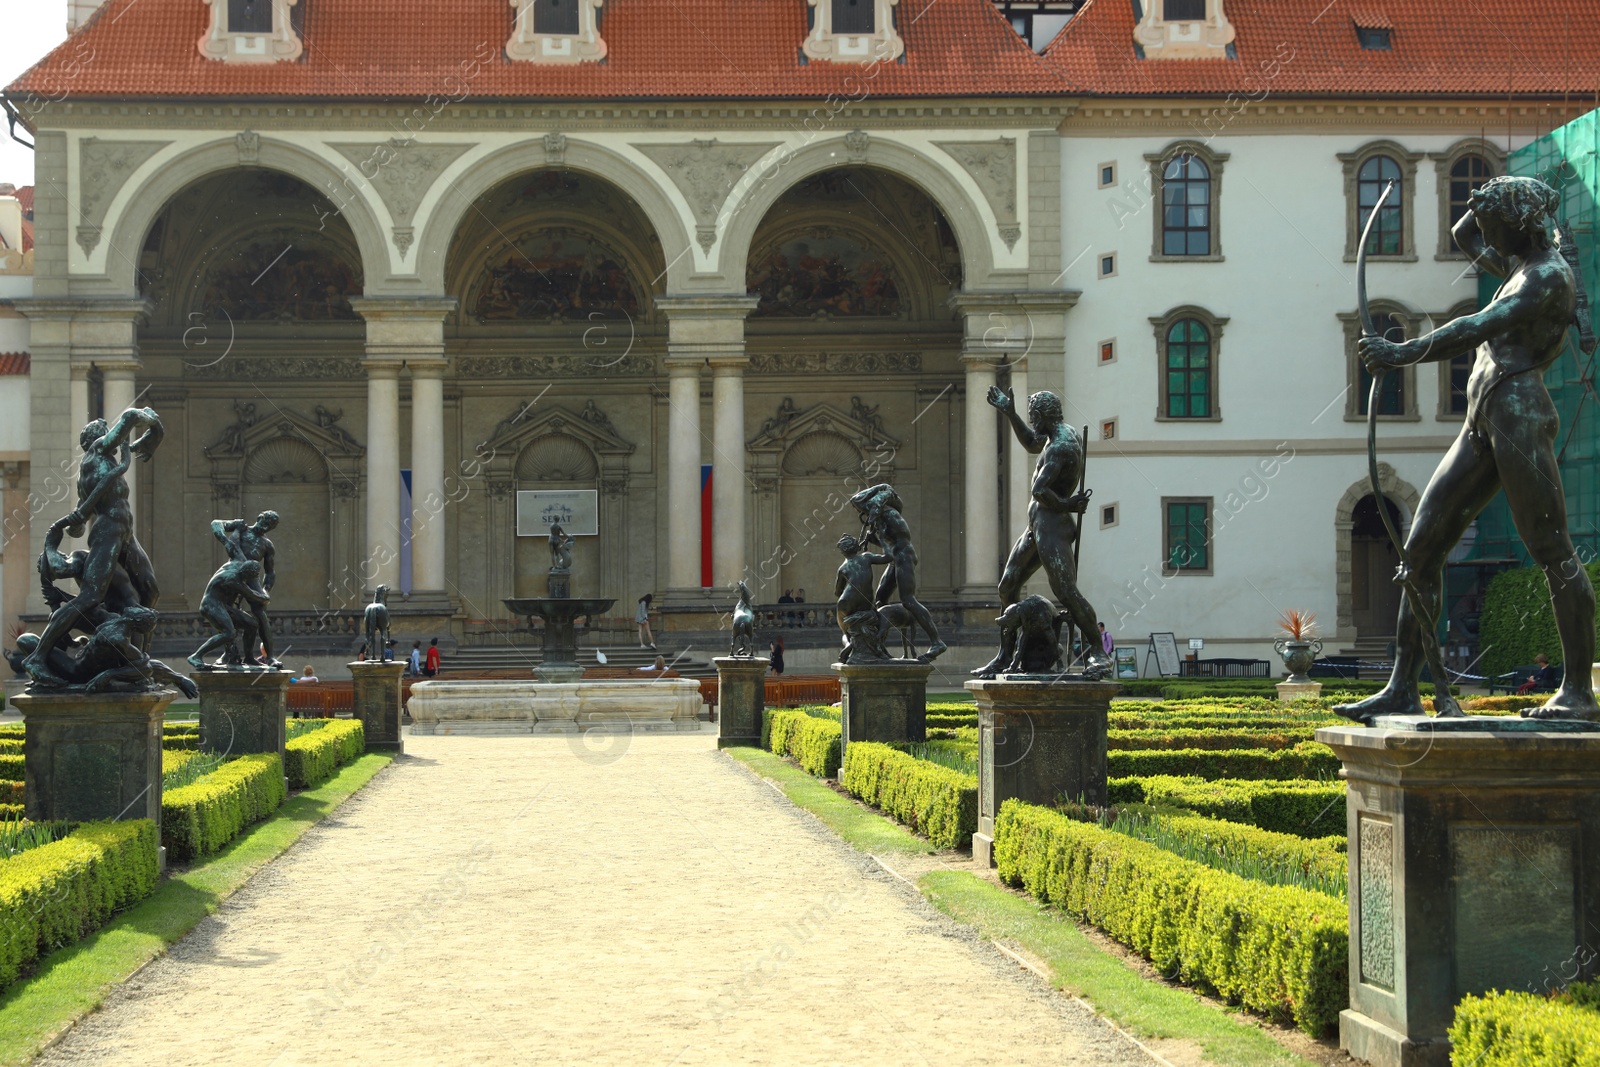 Photo of PRAGUE, CZECH REPUBLIC - APRIL 25, 2019: Statues and sala terrena in garden of Wallenstein Palace